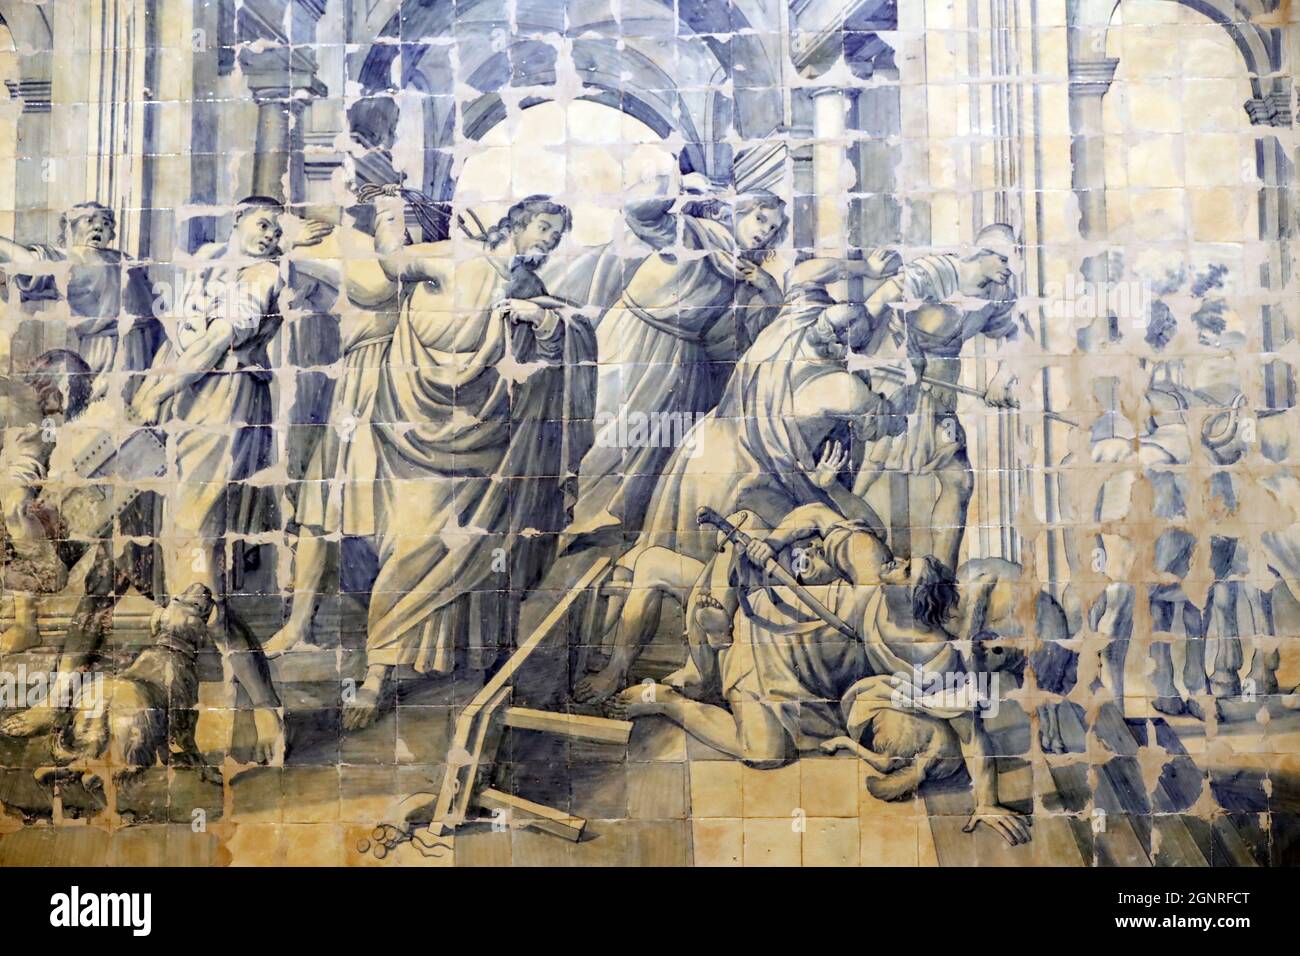 Church of Mercy.  Azulejos. The cleansing of the Temple narrative. Jesus. Evora. Portugal. Stock Photo